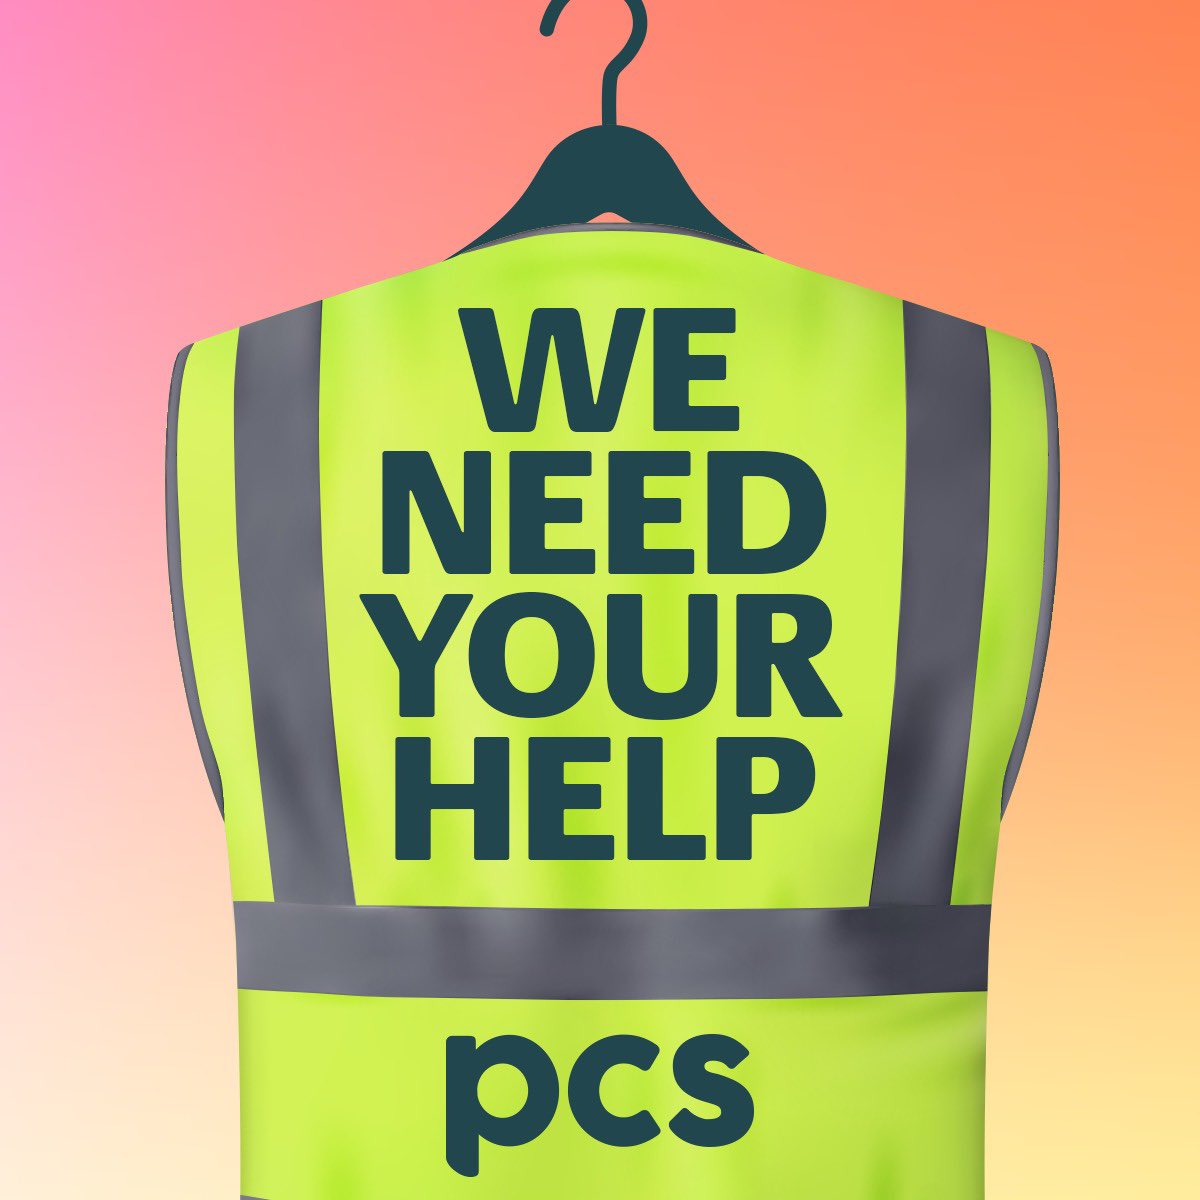 Stewards needed for historic march in Cheltenham Read more and apply 👇👇 pcs.org.uk/news-events/ne… #PCS